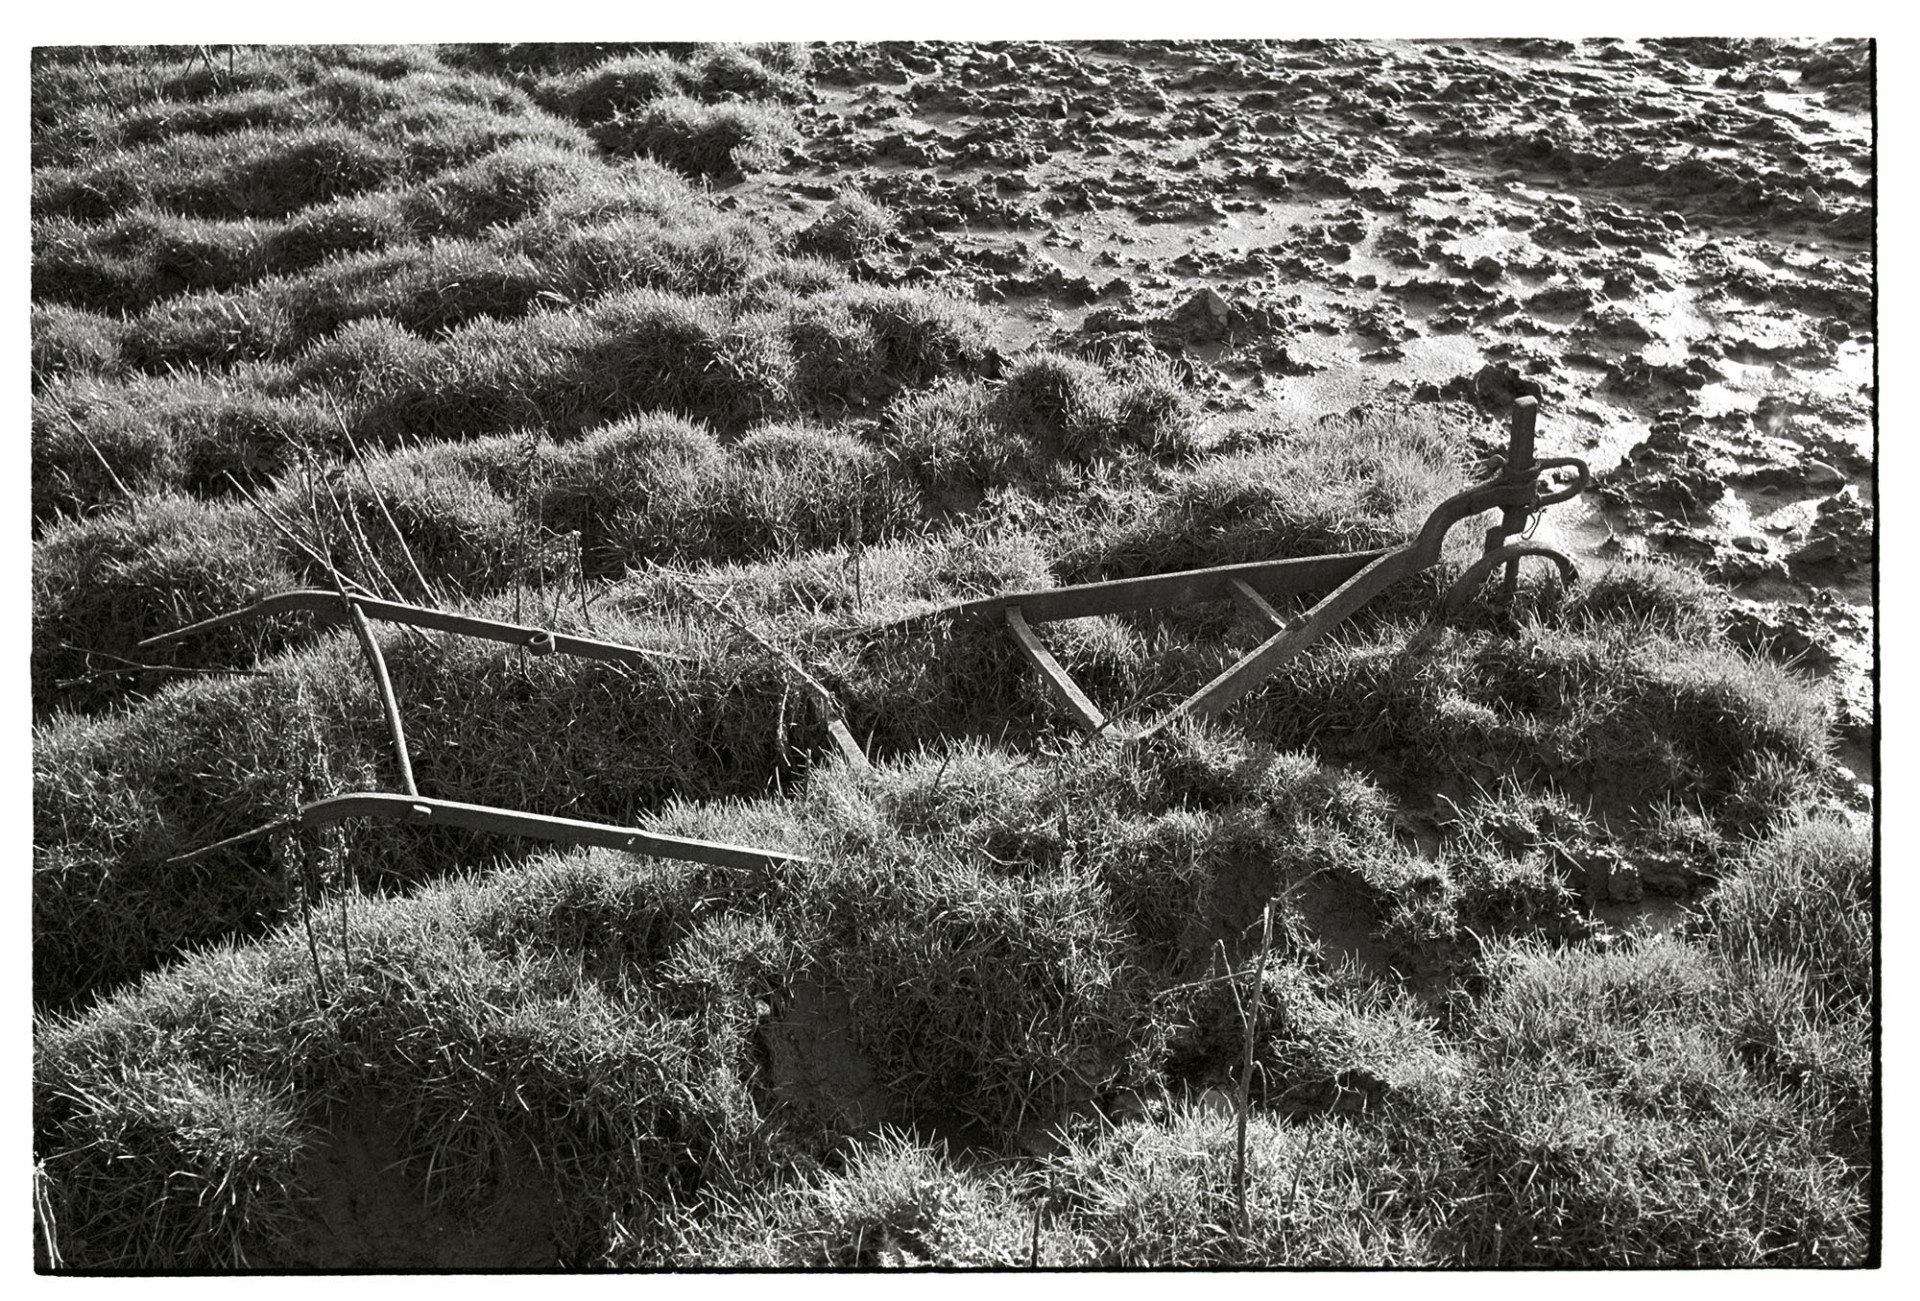 Old rusty abandoned plough  in muddy field.
[An abandoned old hand plough half buried in a muddy field at Mousehole, Upcott.]